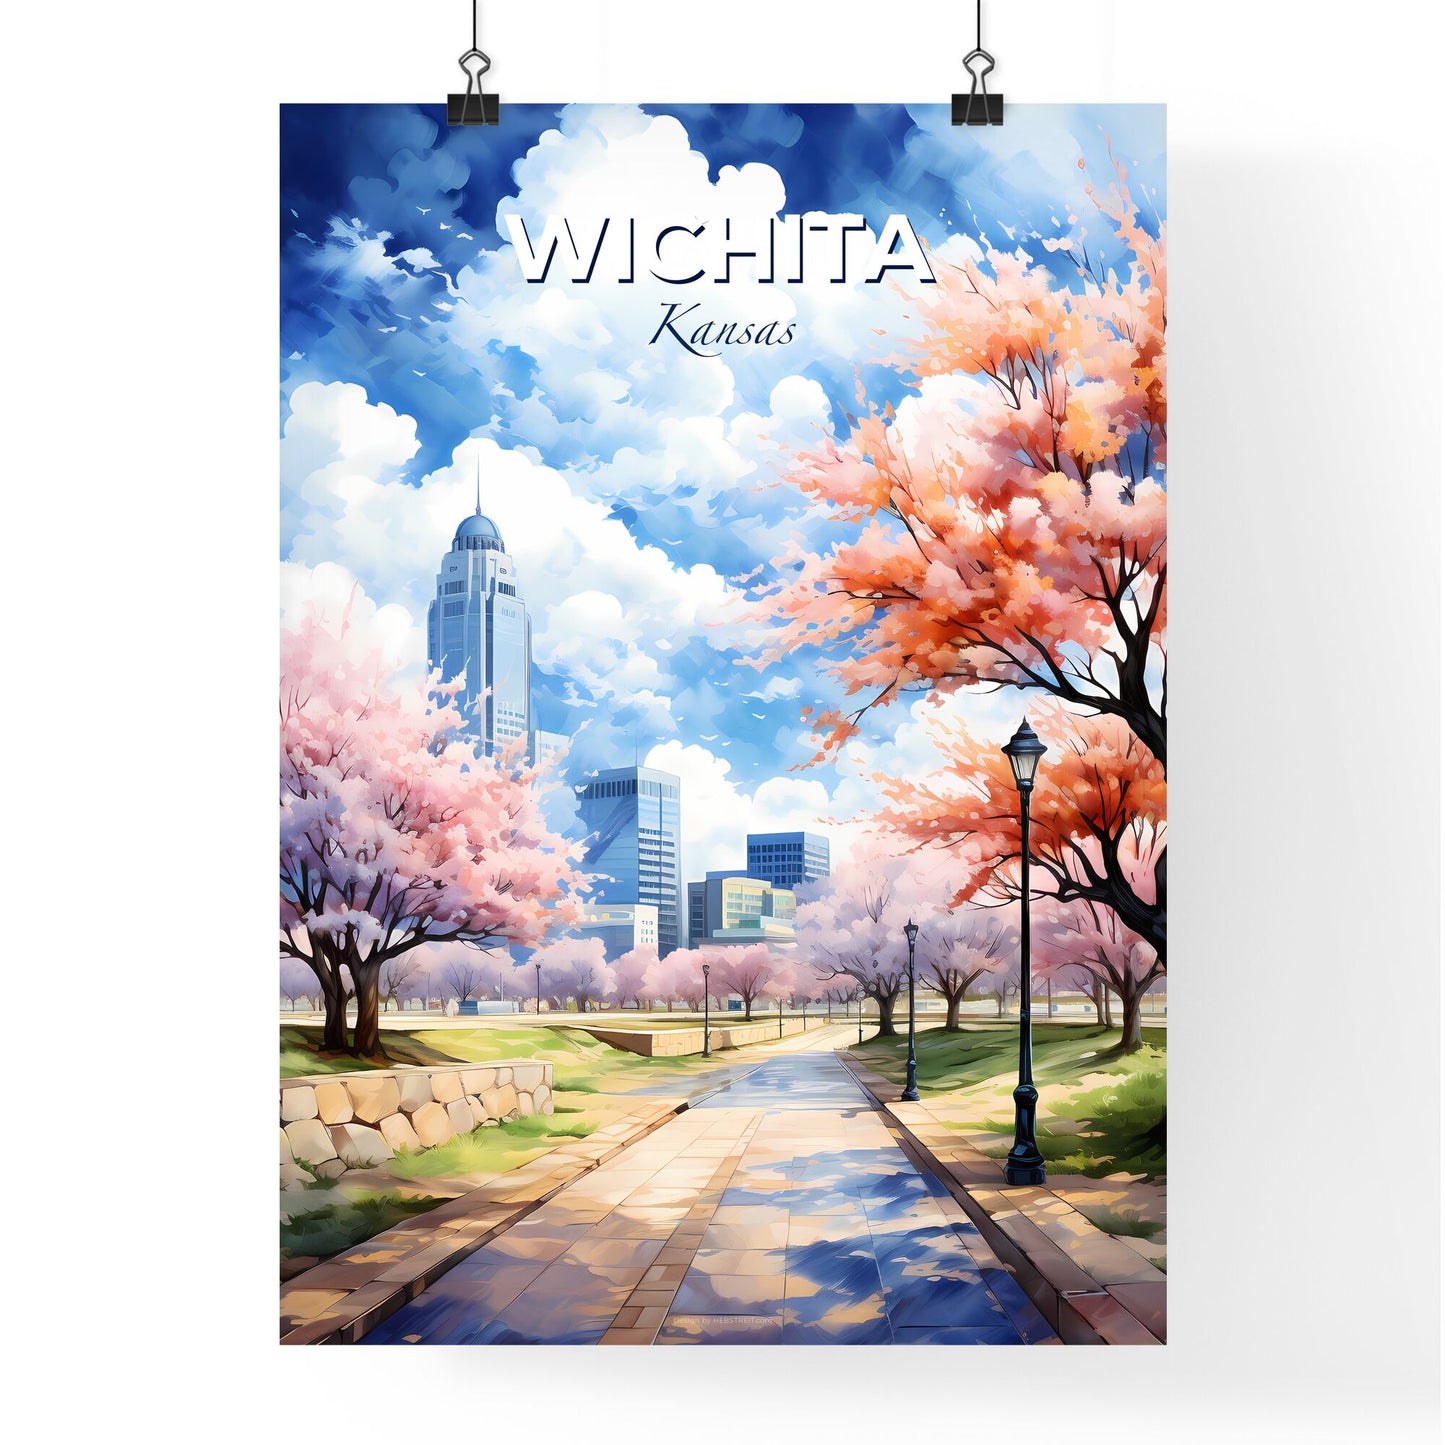 Wichita Kansas Skyline - A Park With Pink Trees And A City In The Background - Customizable Travel Gift Default Title